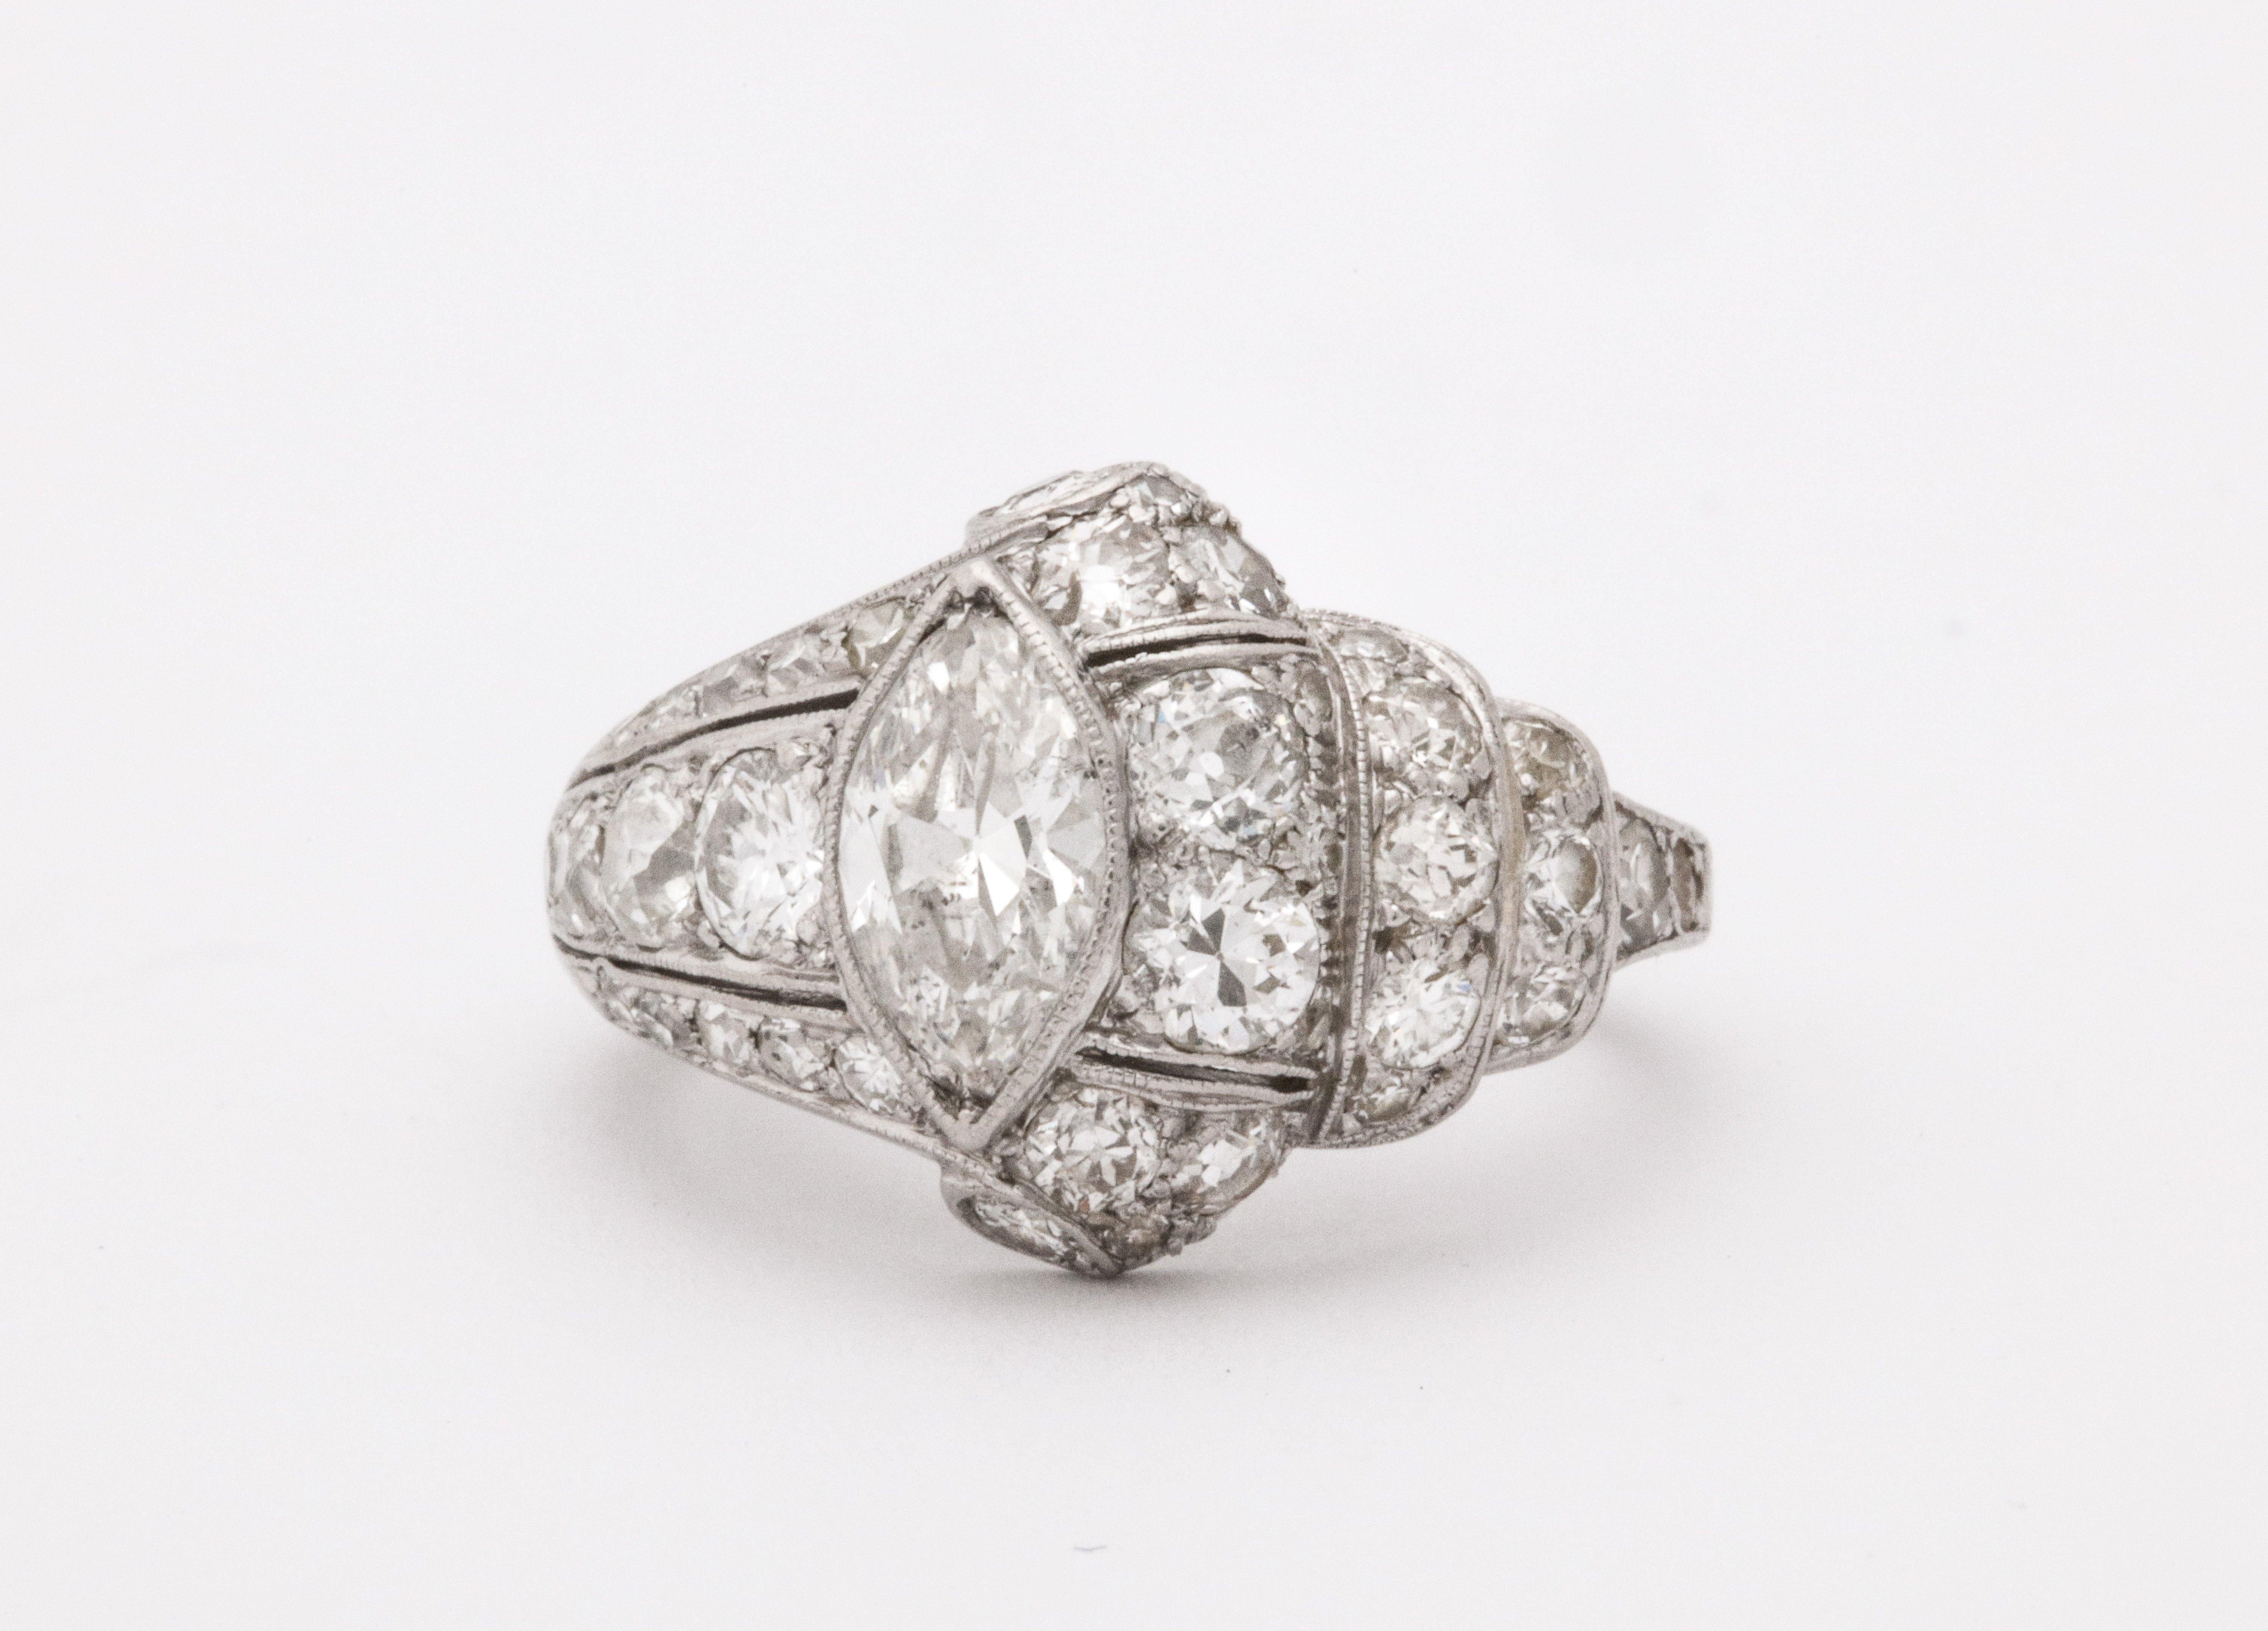 A wonderful Art Deco platinum engagement/cocktail ring with a center marquise 0.80 carat diamond surrounded with 0.80 carat of smaller diamonds.